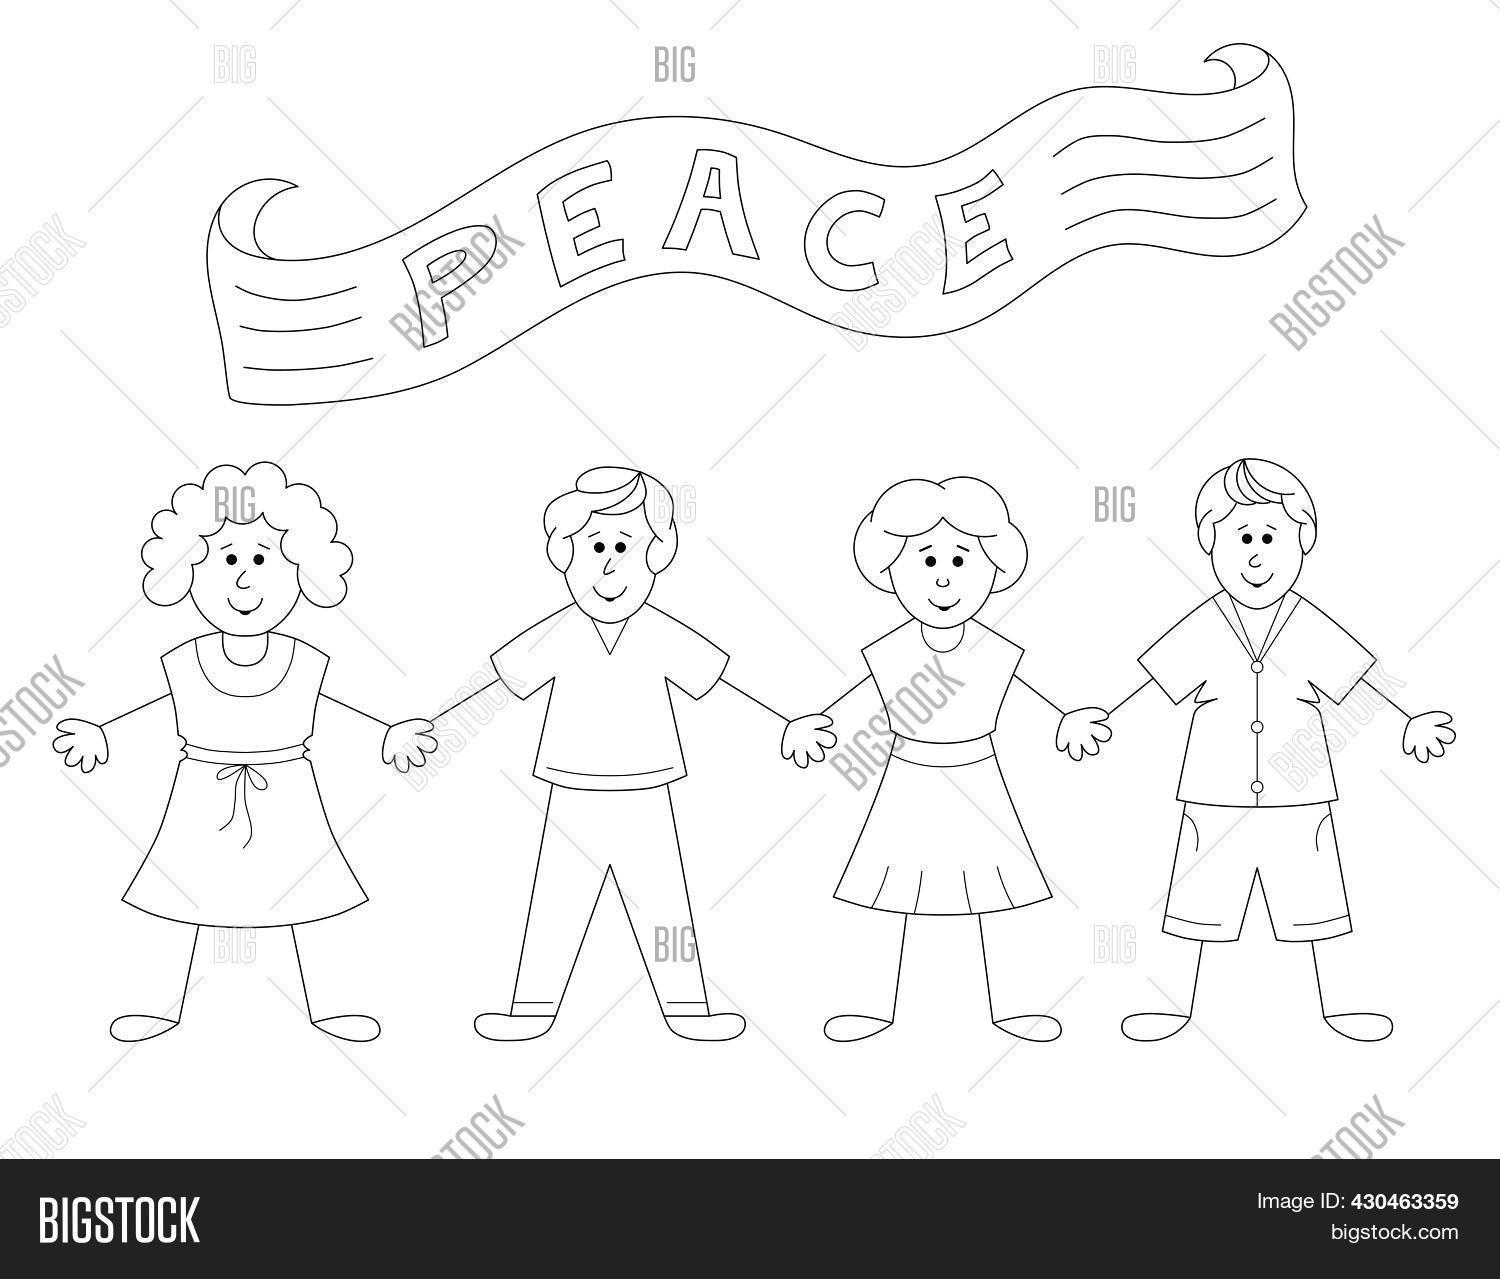 Peace day coloring image photo free trial bigstock